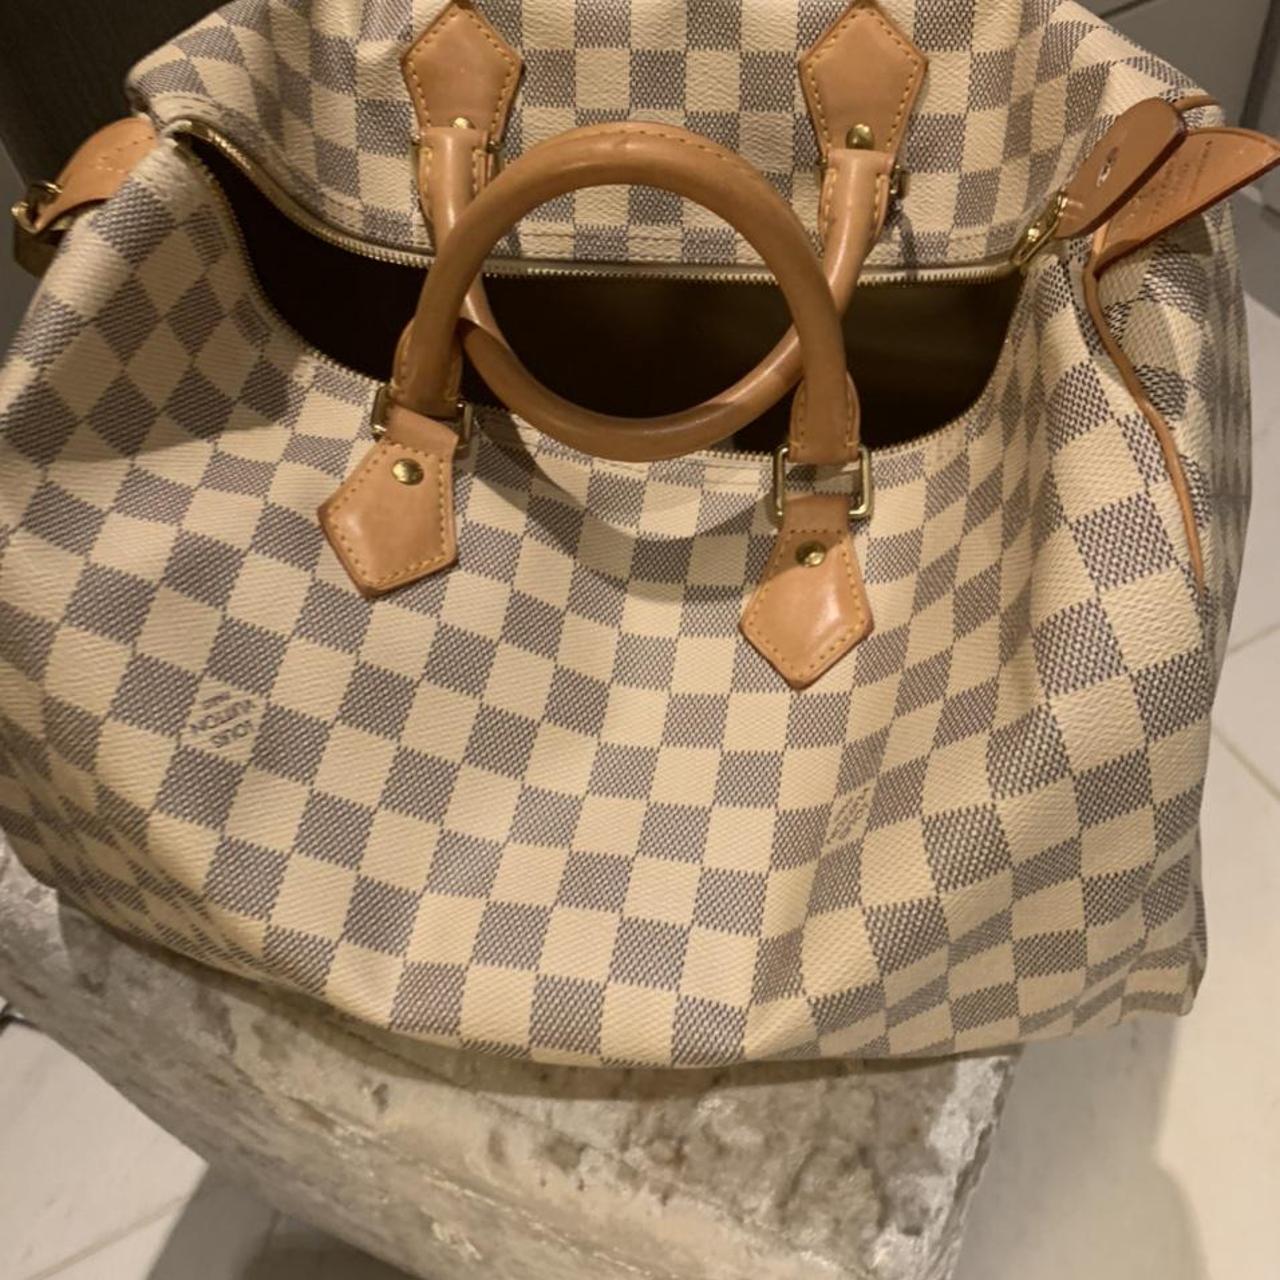 🌟 LV BAG 🌟 🌟 Message before purchasing! 🌟 PRICE IS - Depop